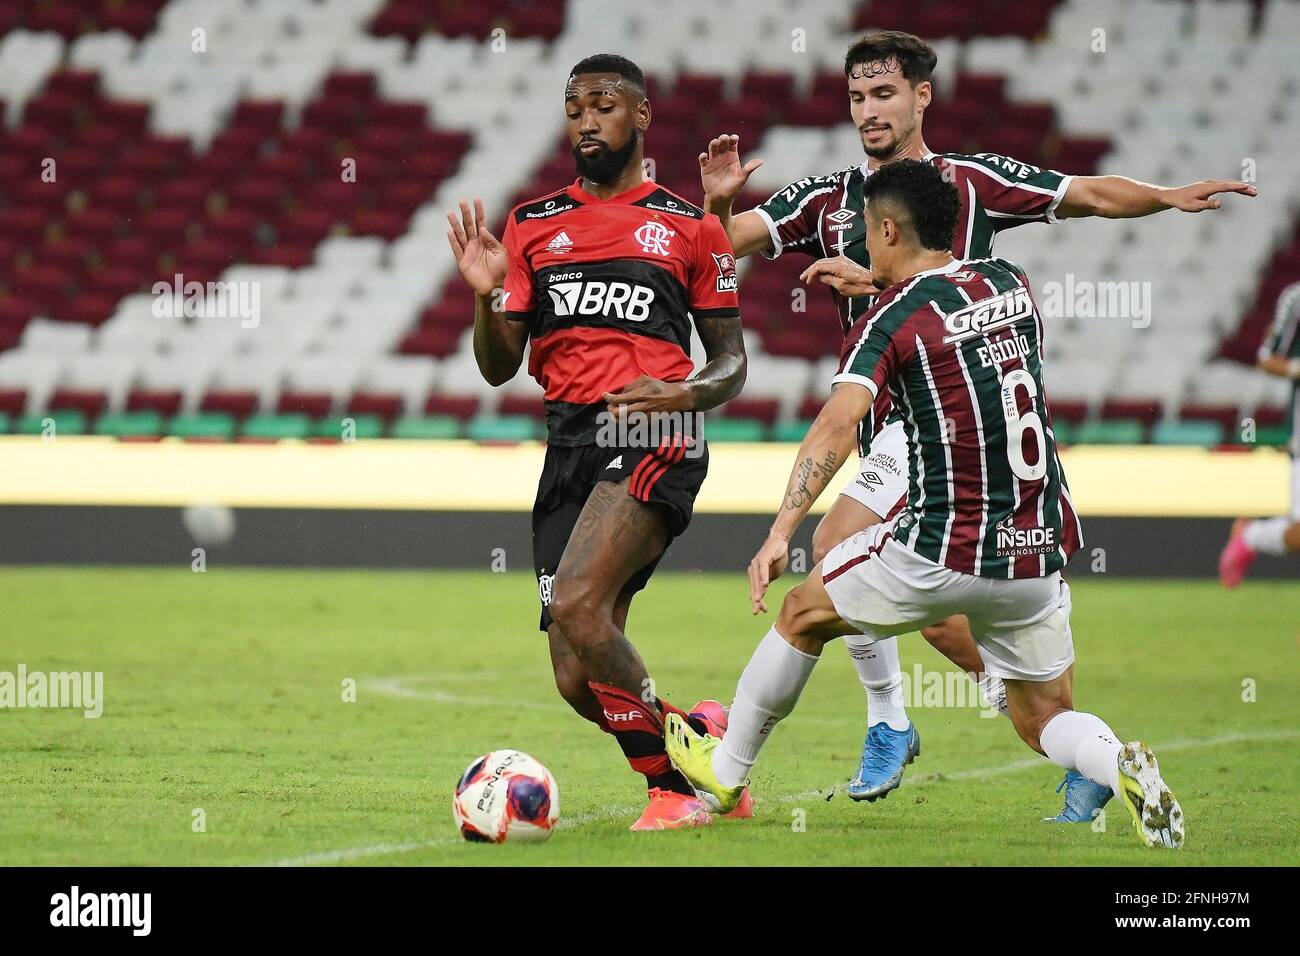 Rio de Janeiro, Brazil, July 1, 2020. Football player Gerson from the Flamengo team during the Flamengo x Fluminense game for the Carioca championship. Stock Photo